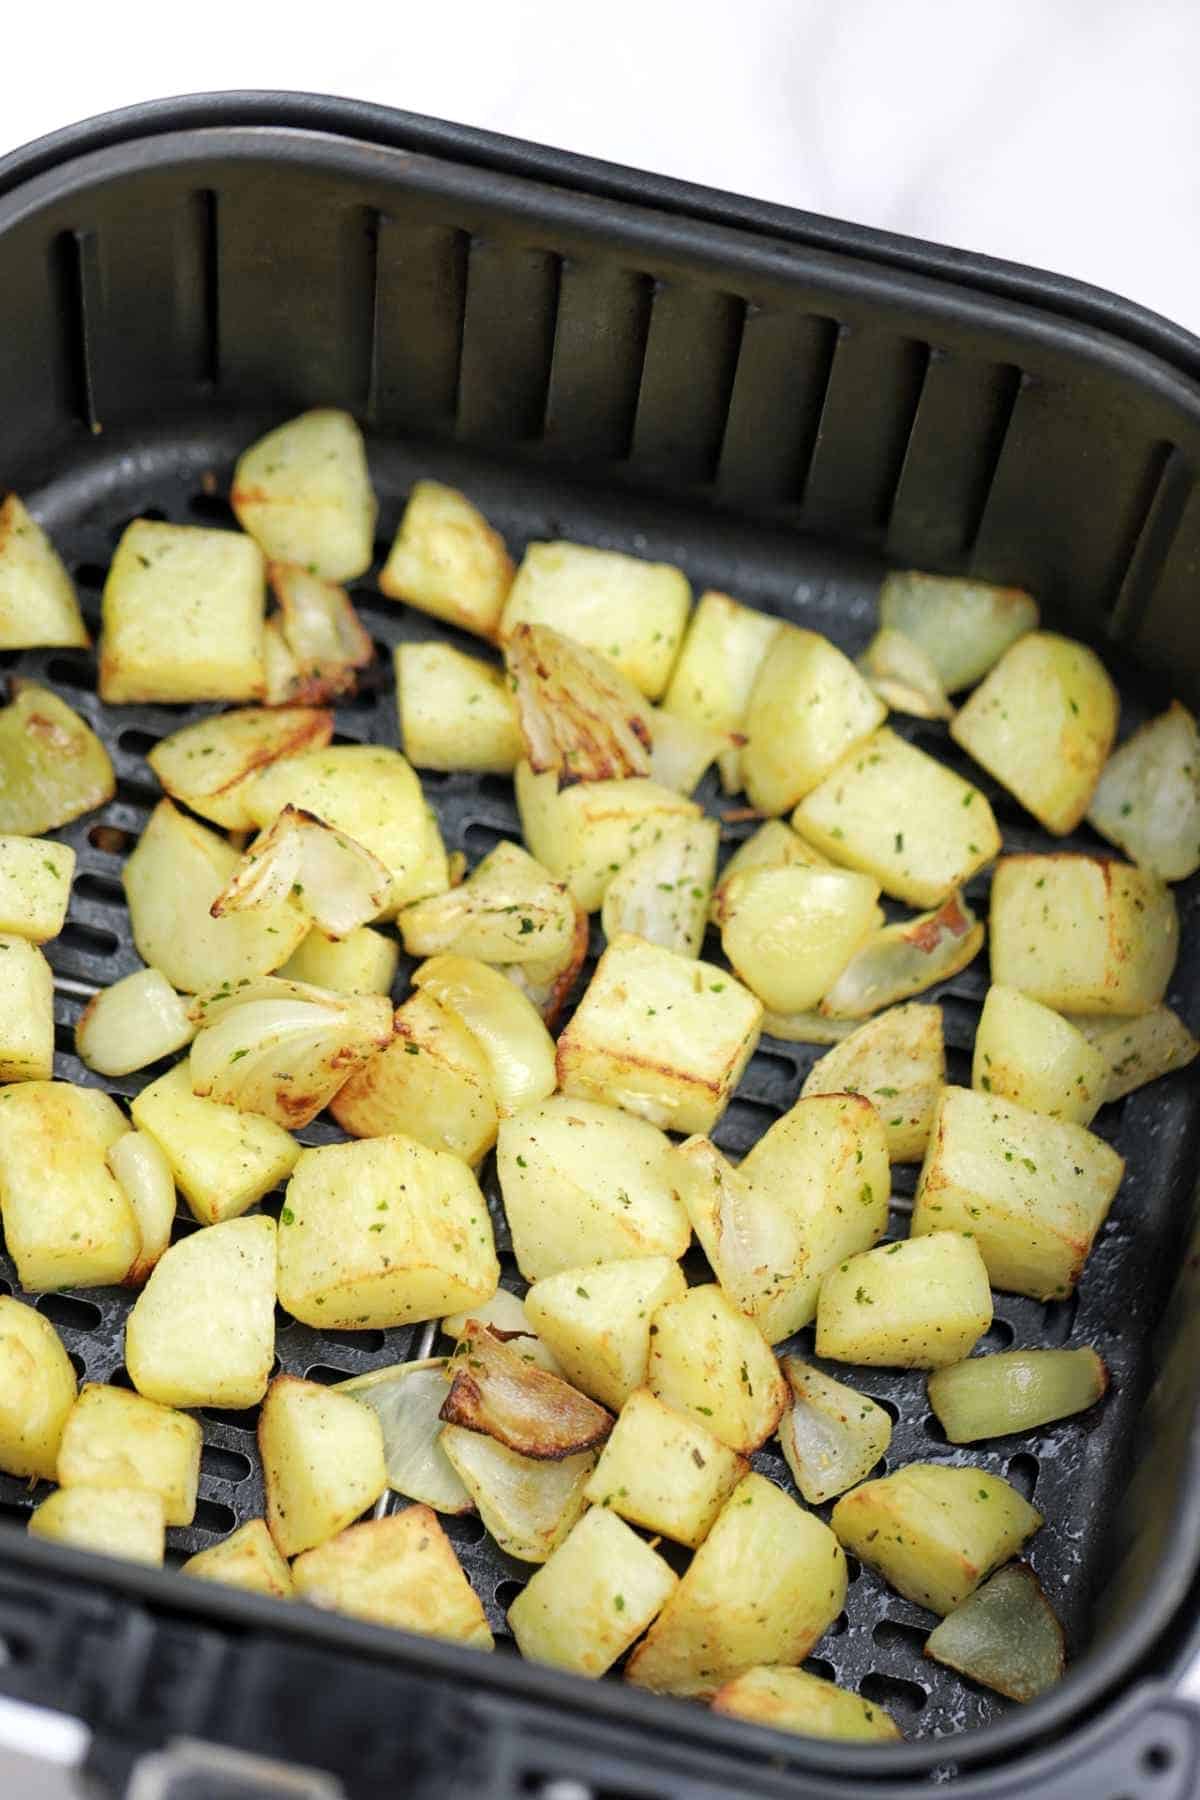 cooked potatoes and onions in air fryer basket.